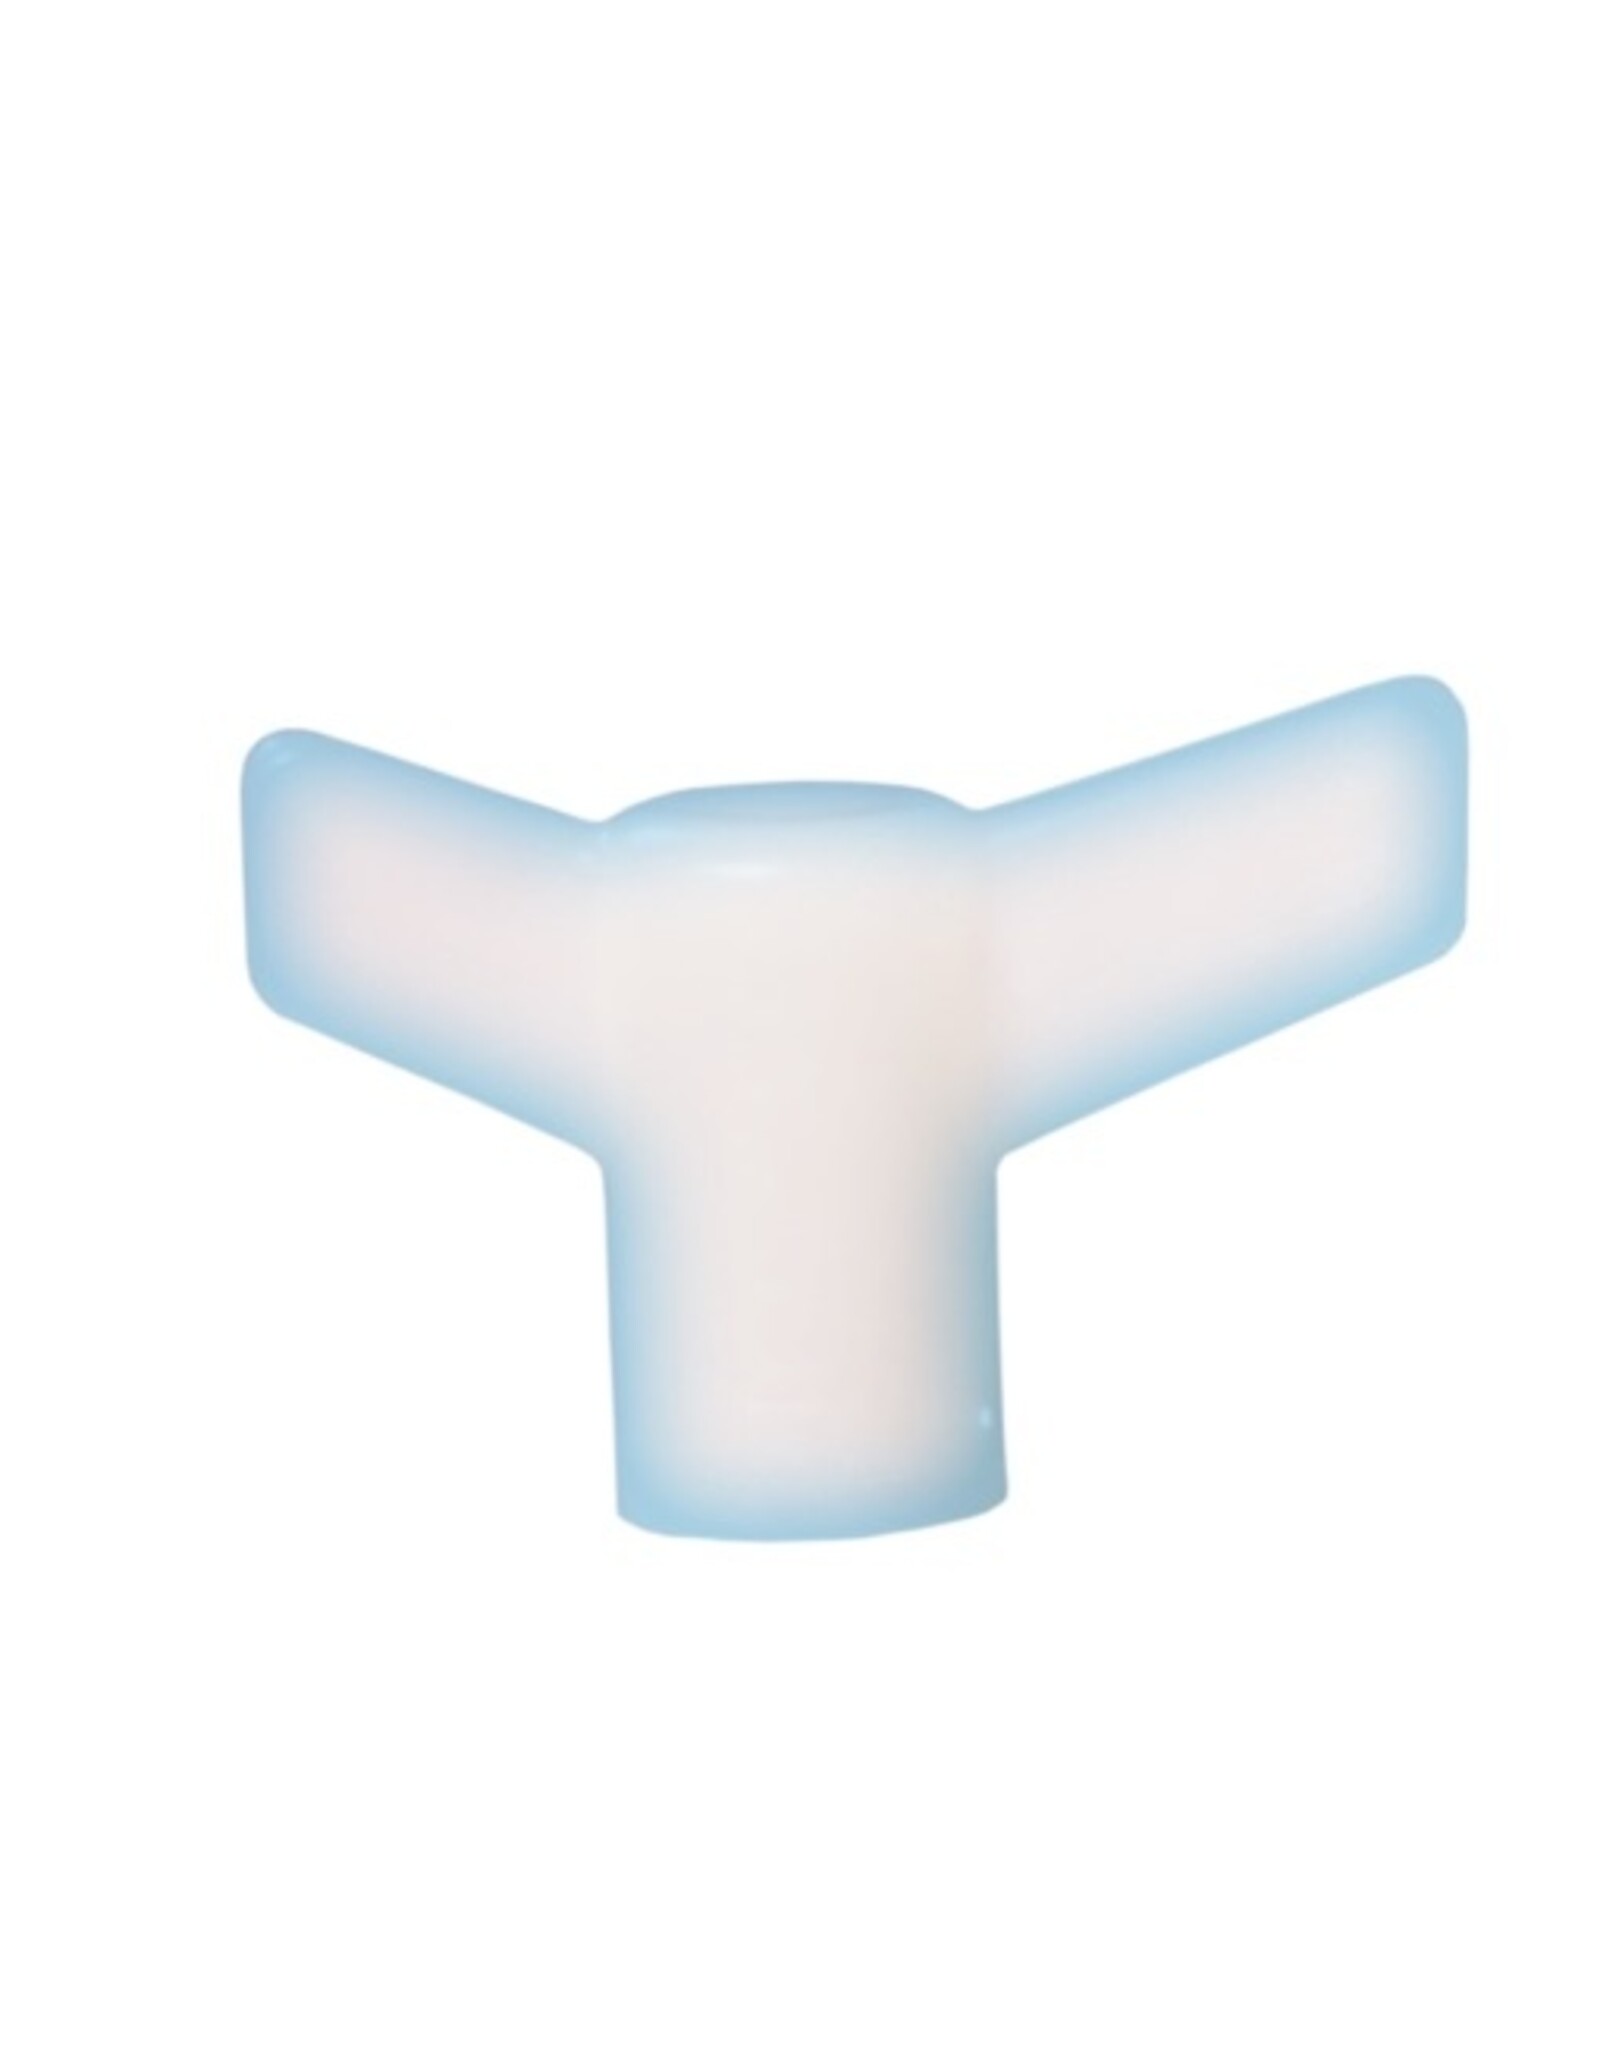 Barefoot Buttons Barefoot Buttons WingMan IceMan White Glow-in-the-Dark Option Knob